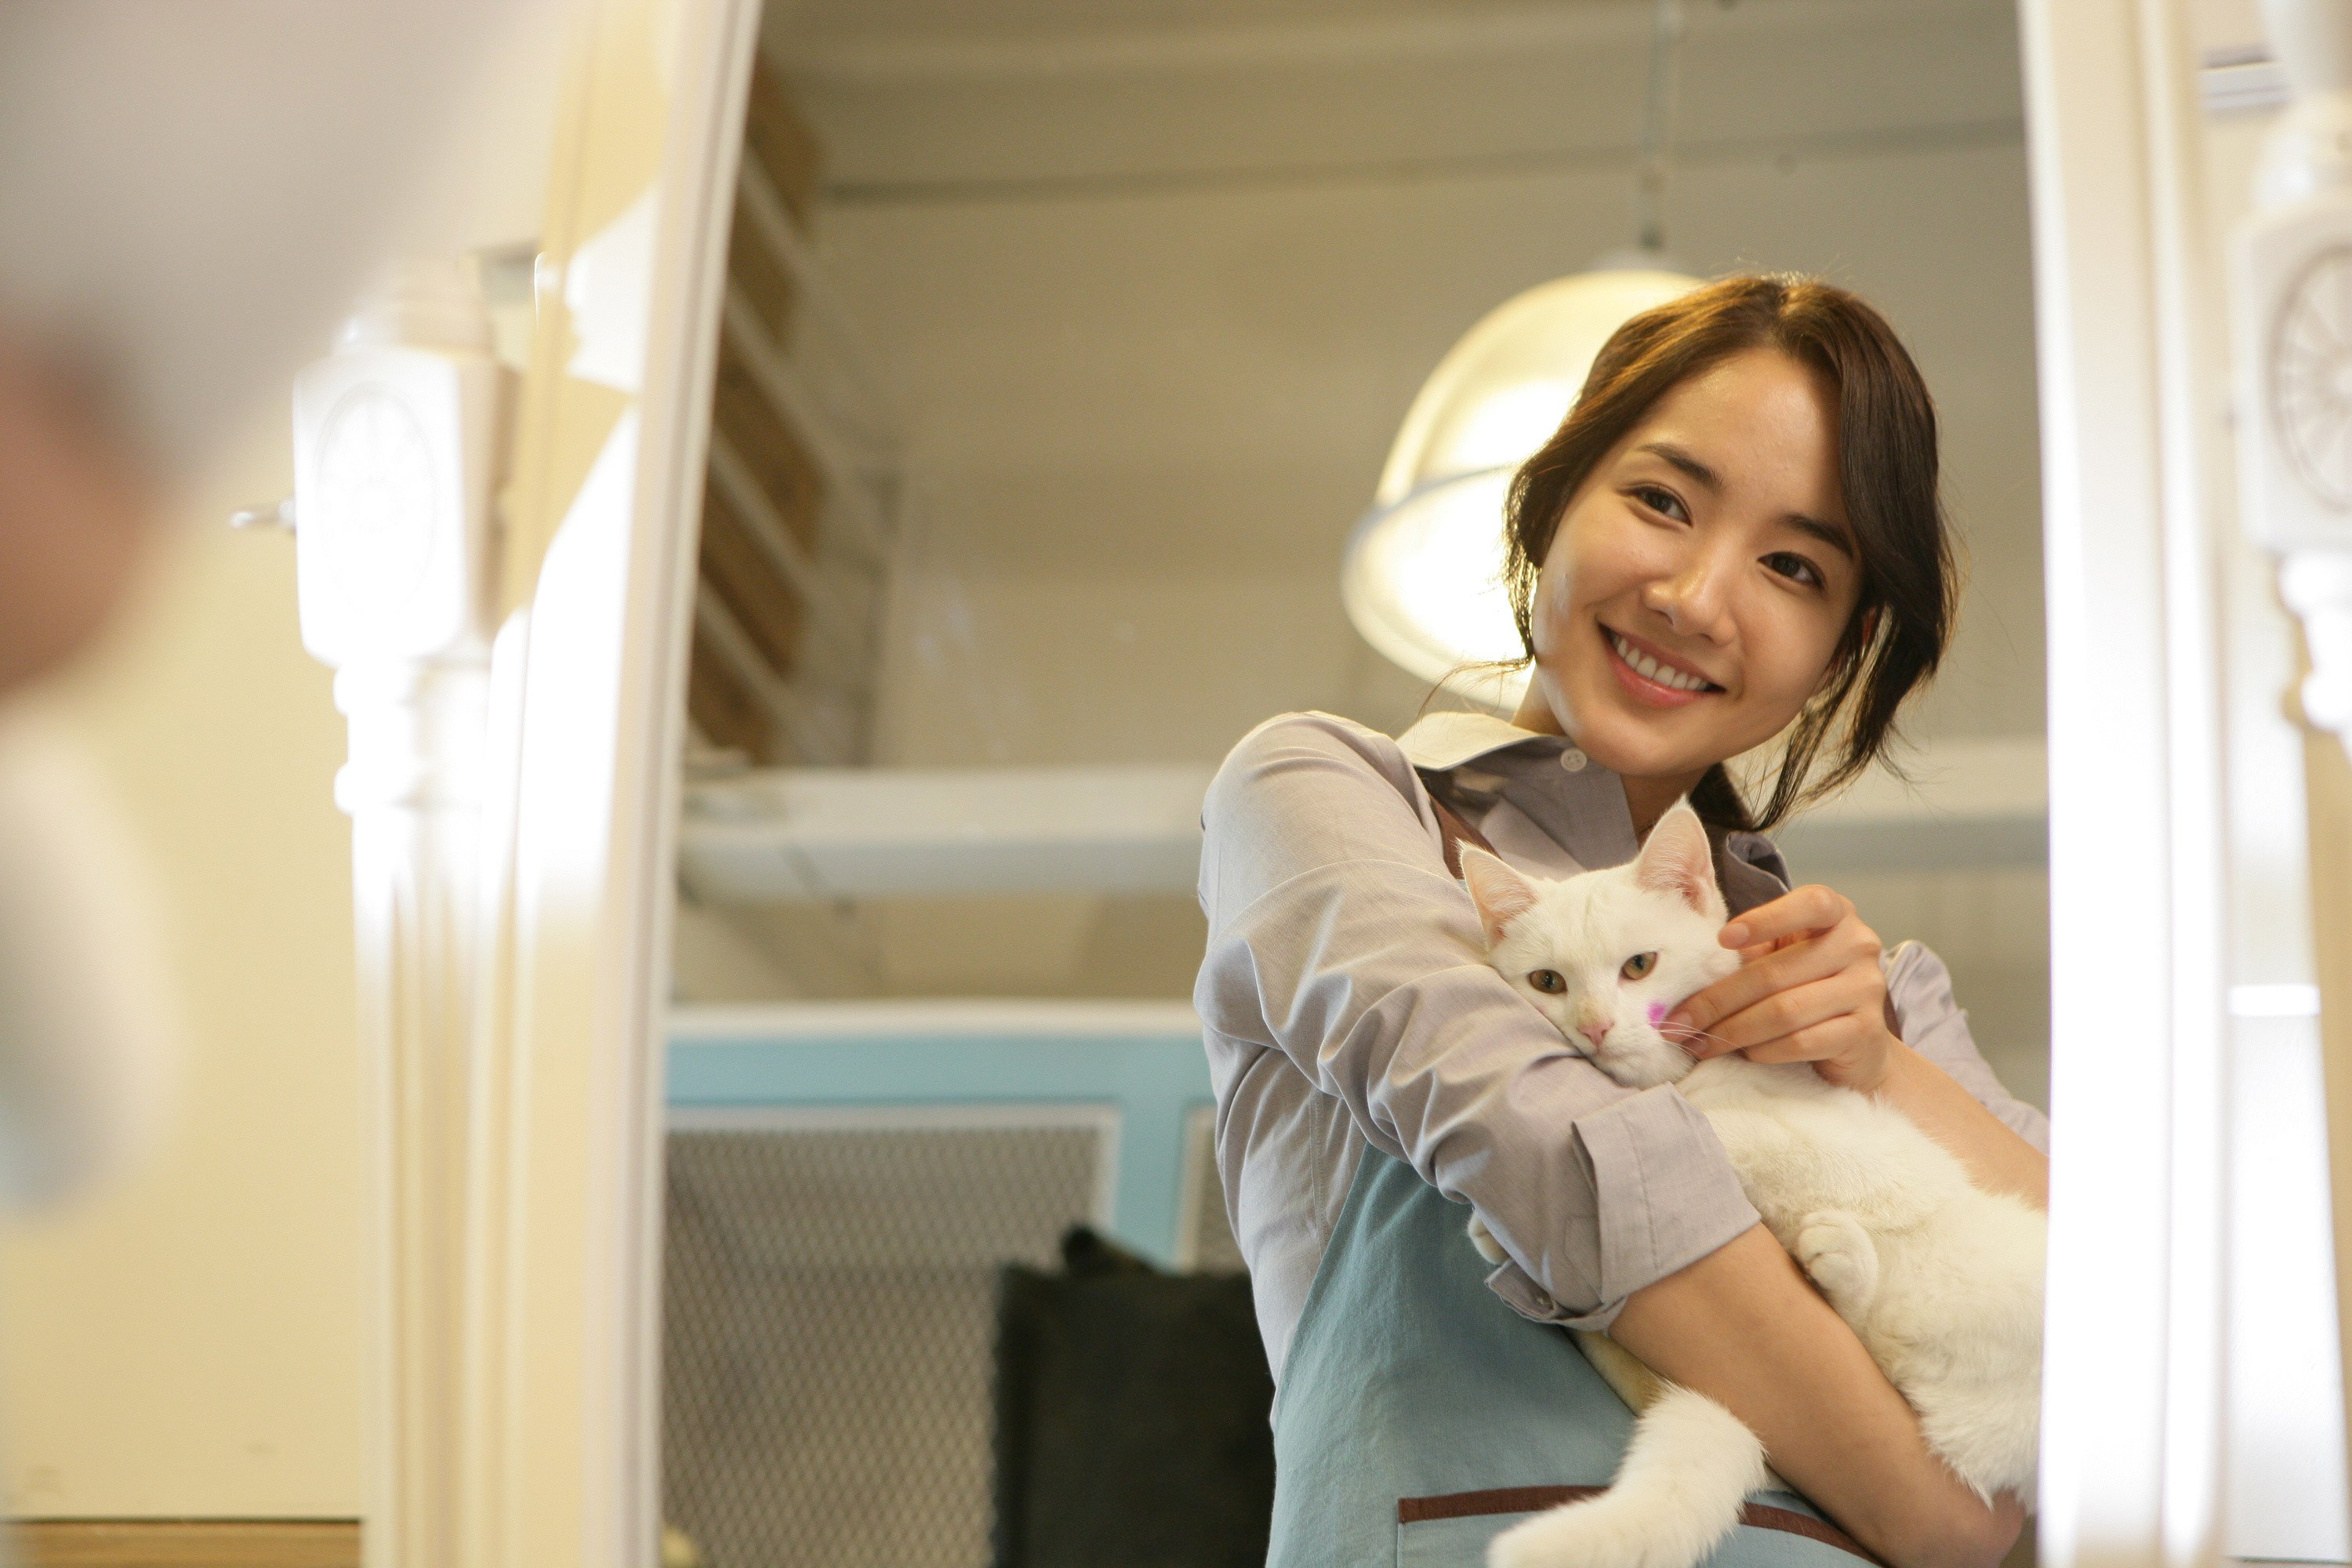 Park Min Young Wallpaper Images Pictures #7owufqt0 – Yoanu